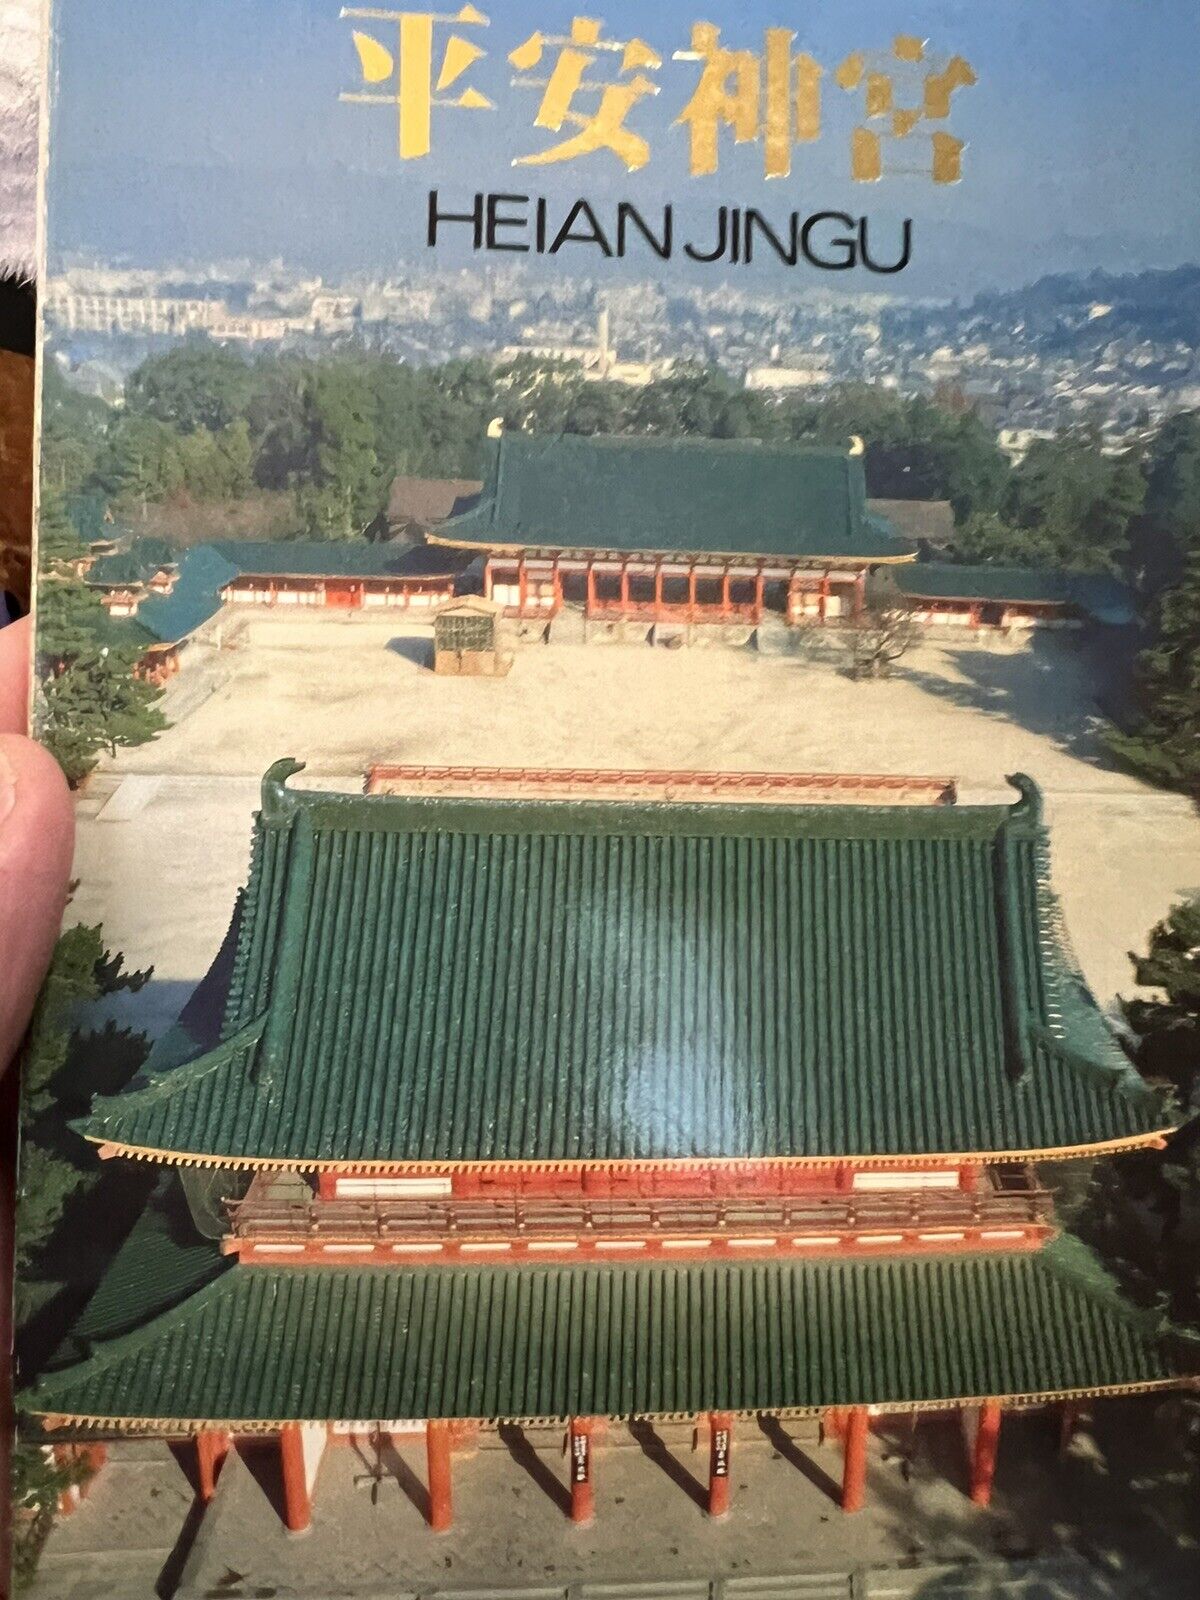 SET OF 5 VTG JAPANESE POSTCARDS PREOWNED AND UNPOSTED HEIAN JINGU